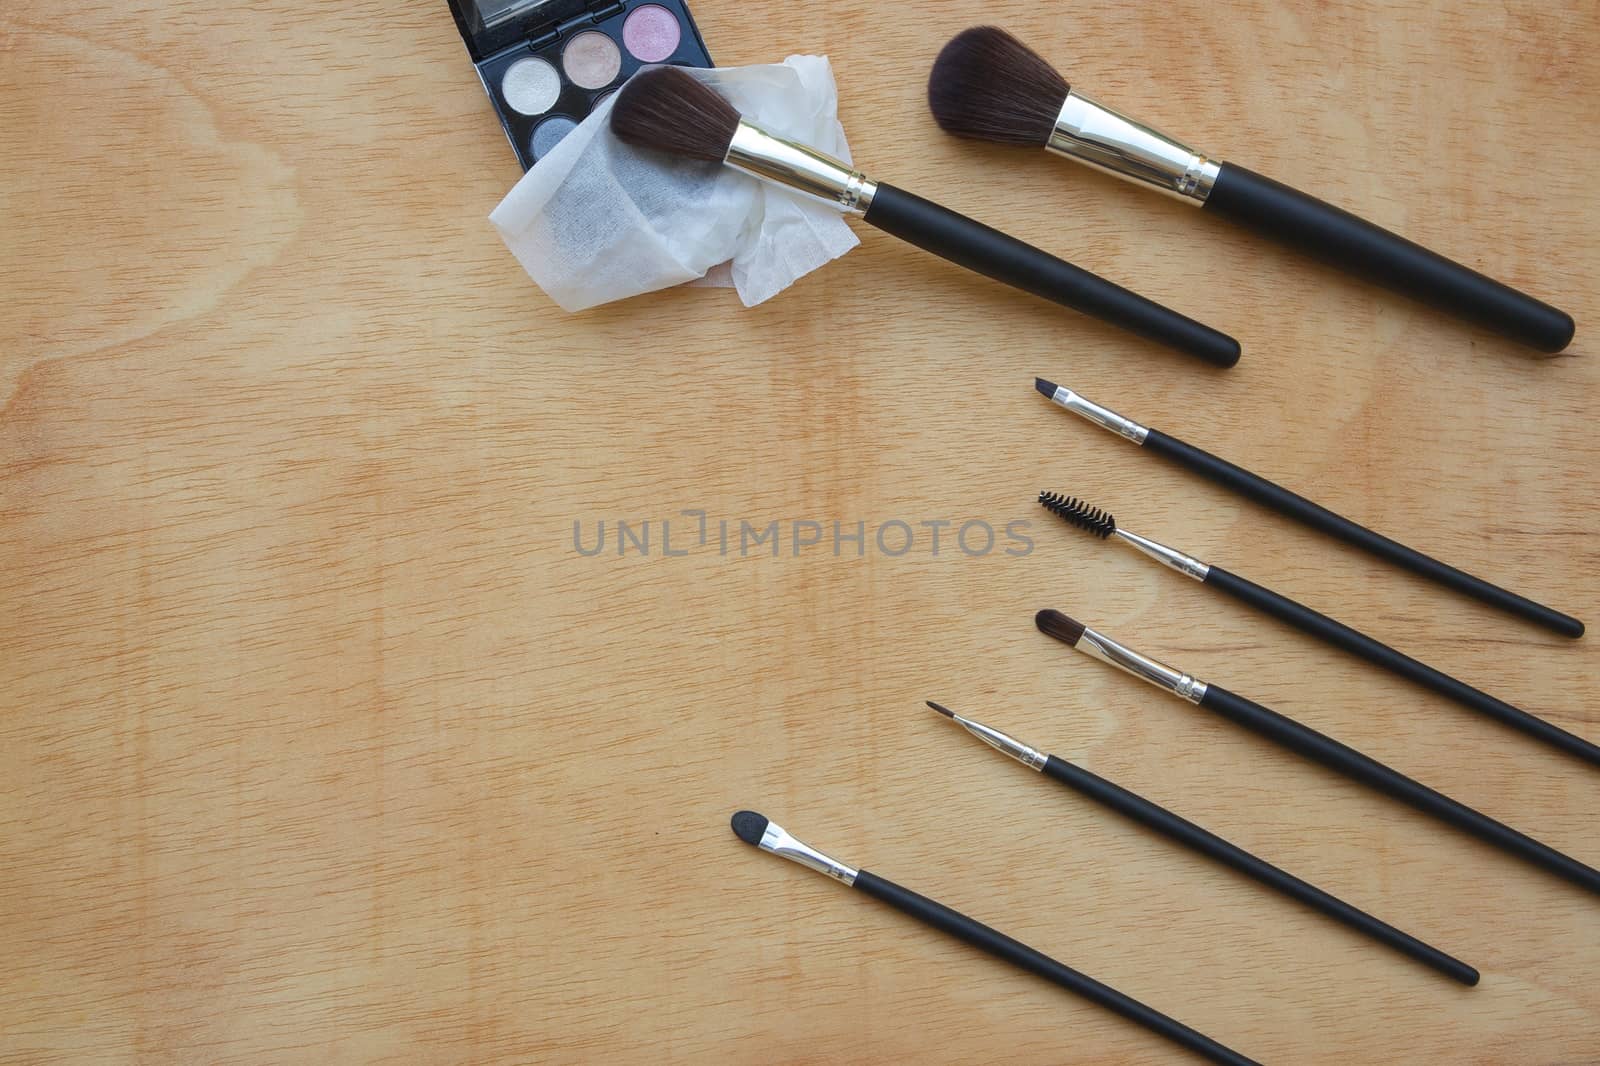 Makeup brushes  set on a wooden surface by tolikoff_photography